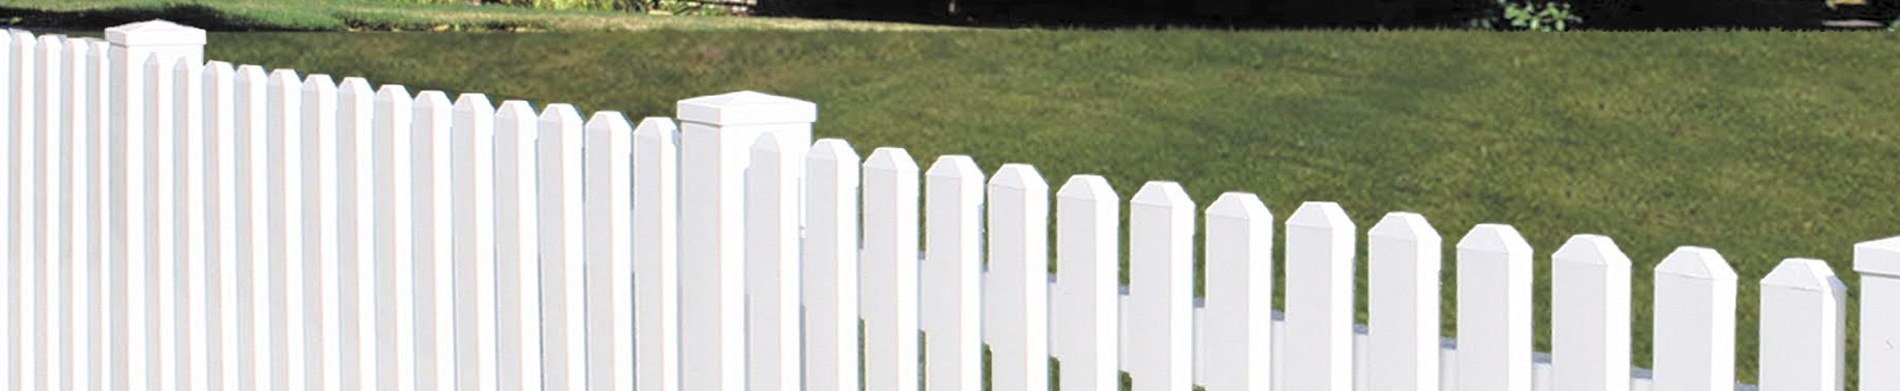 Installing a vinyl fence in your locality – Trust only Duramax